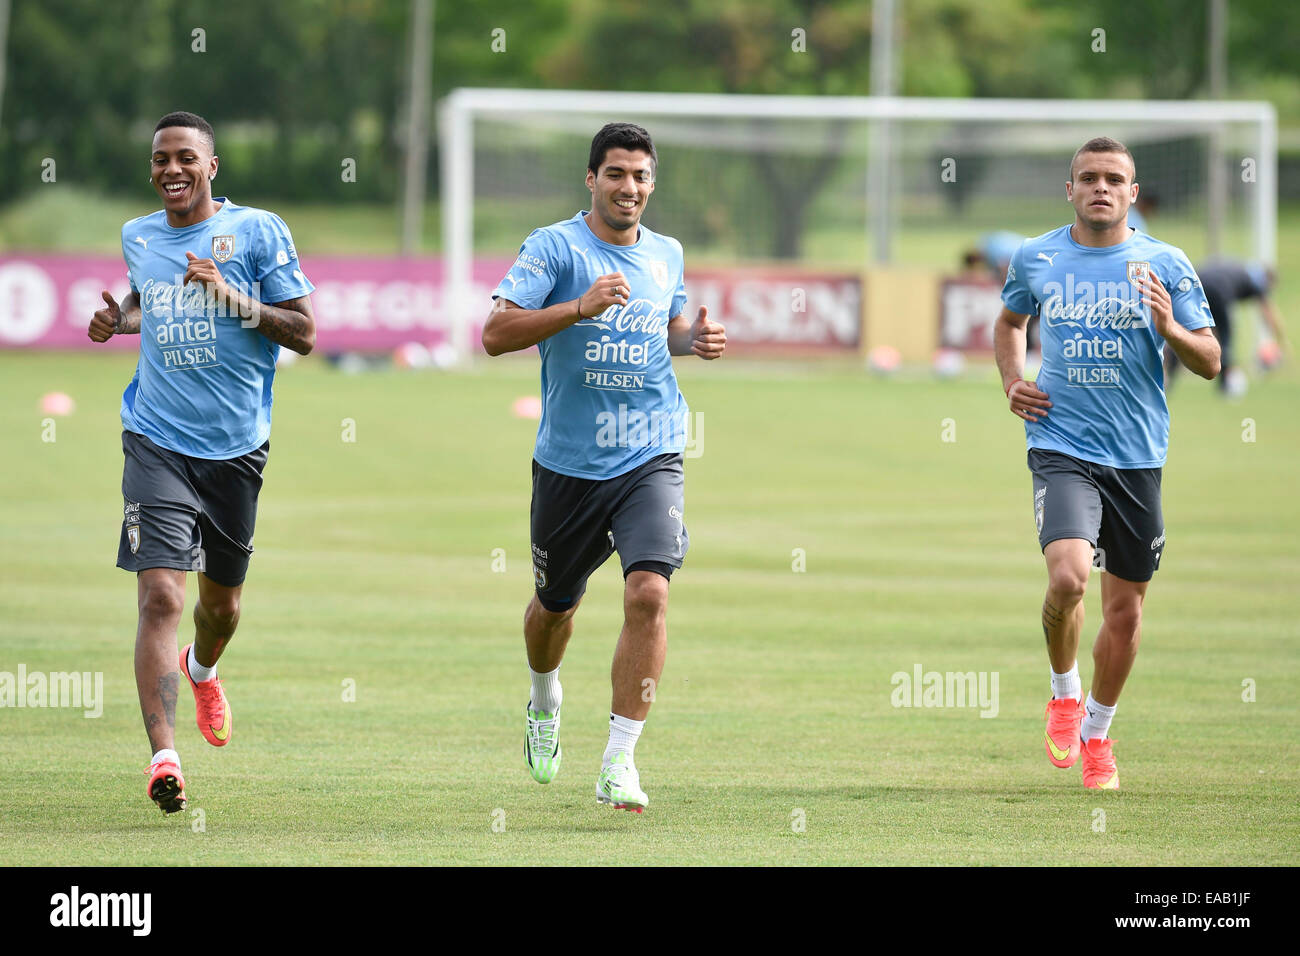 Montevideo, Uruguay. 10th Nov, 2014. Abel Hernandez (L), Luis Suarez(C) and Jonathan Rodriguez of Uruguay's national soccer team, take part in a training session at the Uruguay Celeste complex in Montevideo, capital of Uruguay, on Nov. 10, 2014. Uruguay's national soccer team will meet Costa Rica in a friendly match on Nov. 12. © Nicolas Celaya/Xinhua/Alamy Live News Stock Photo